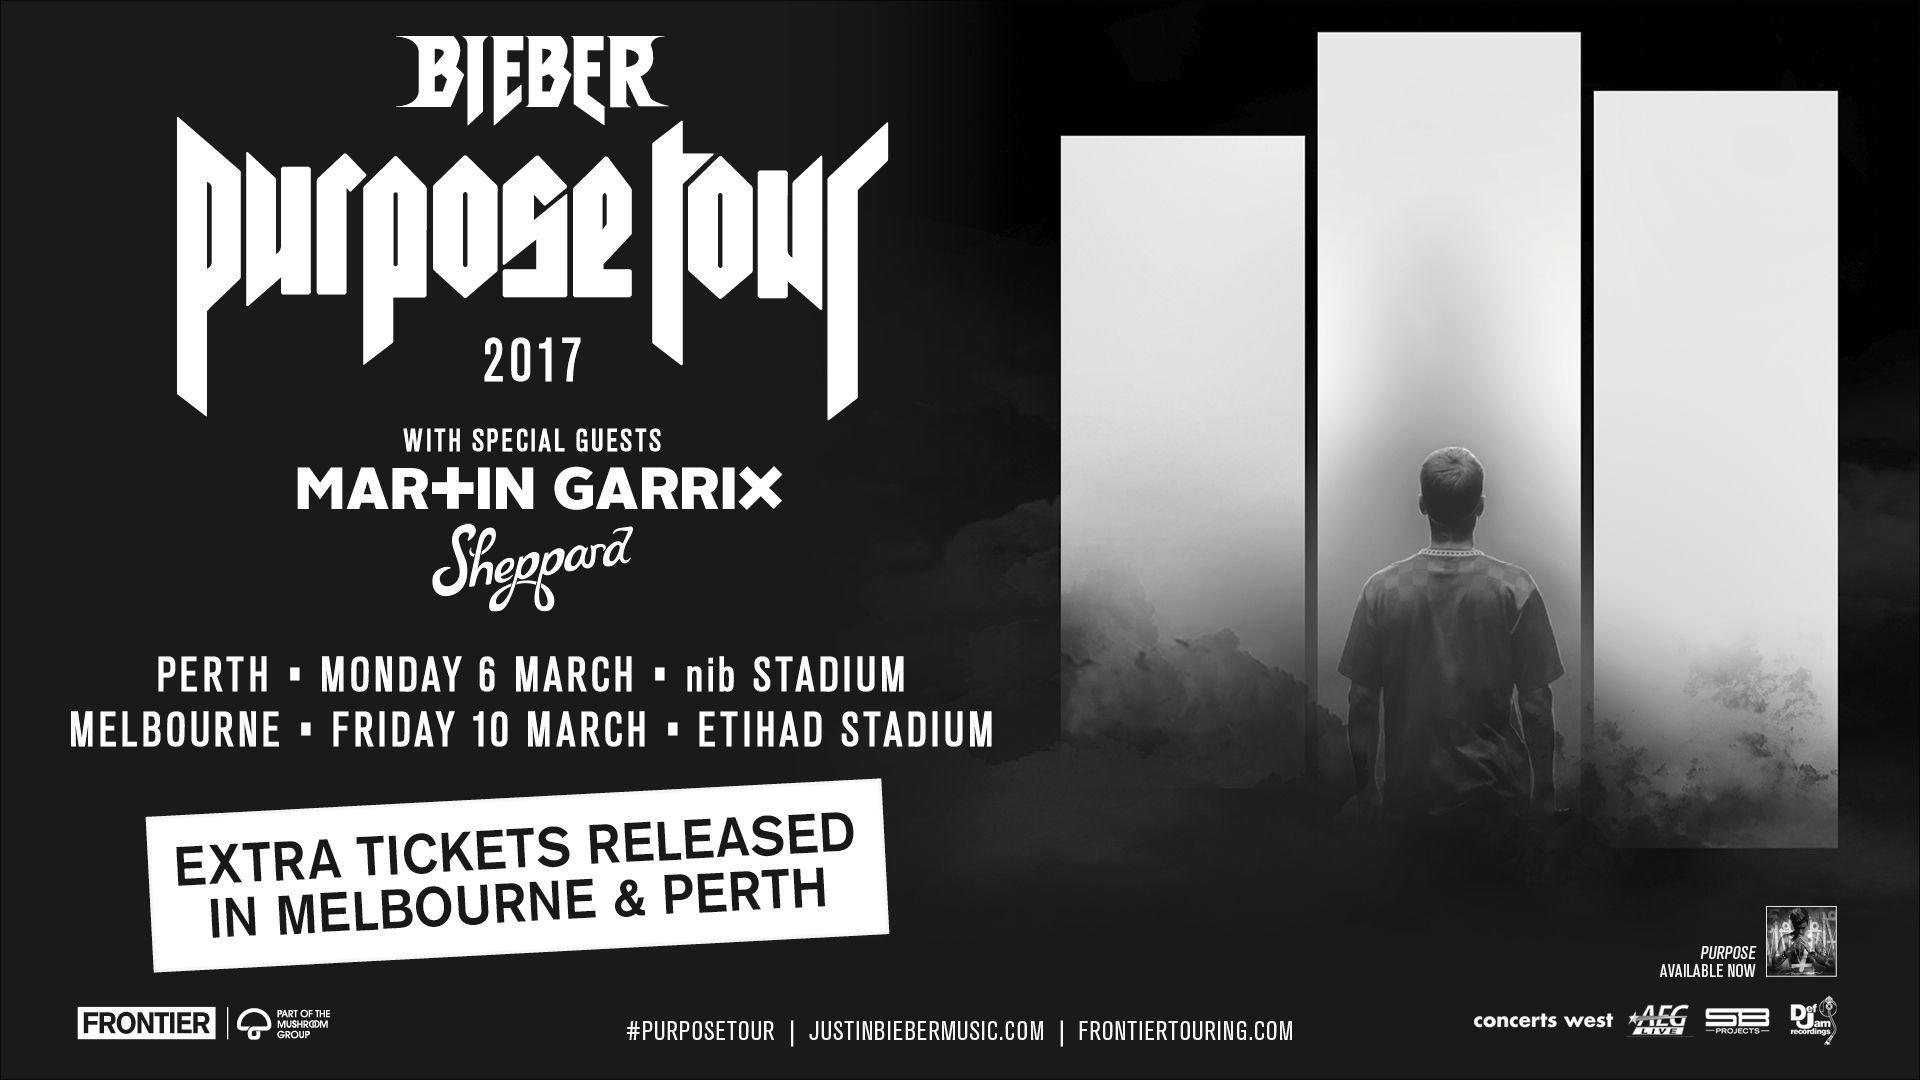 JUSTIN BIEBER. Extra tickets released to Perth & Melbourne shows